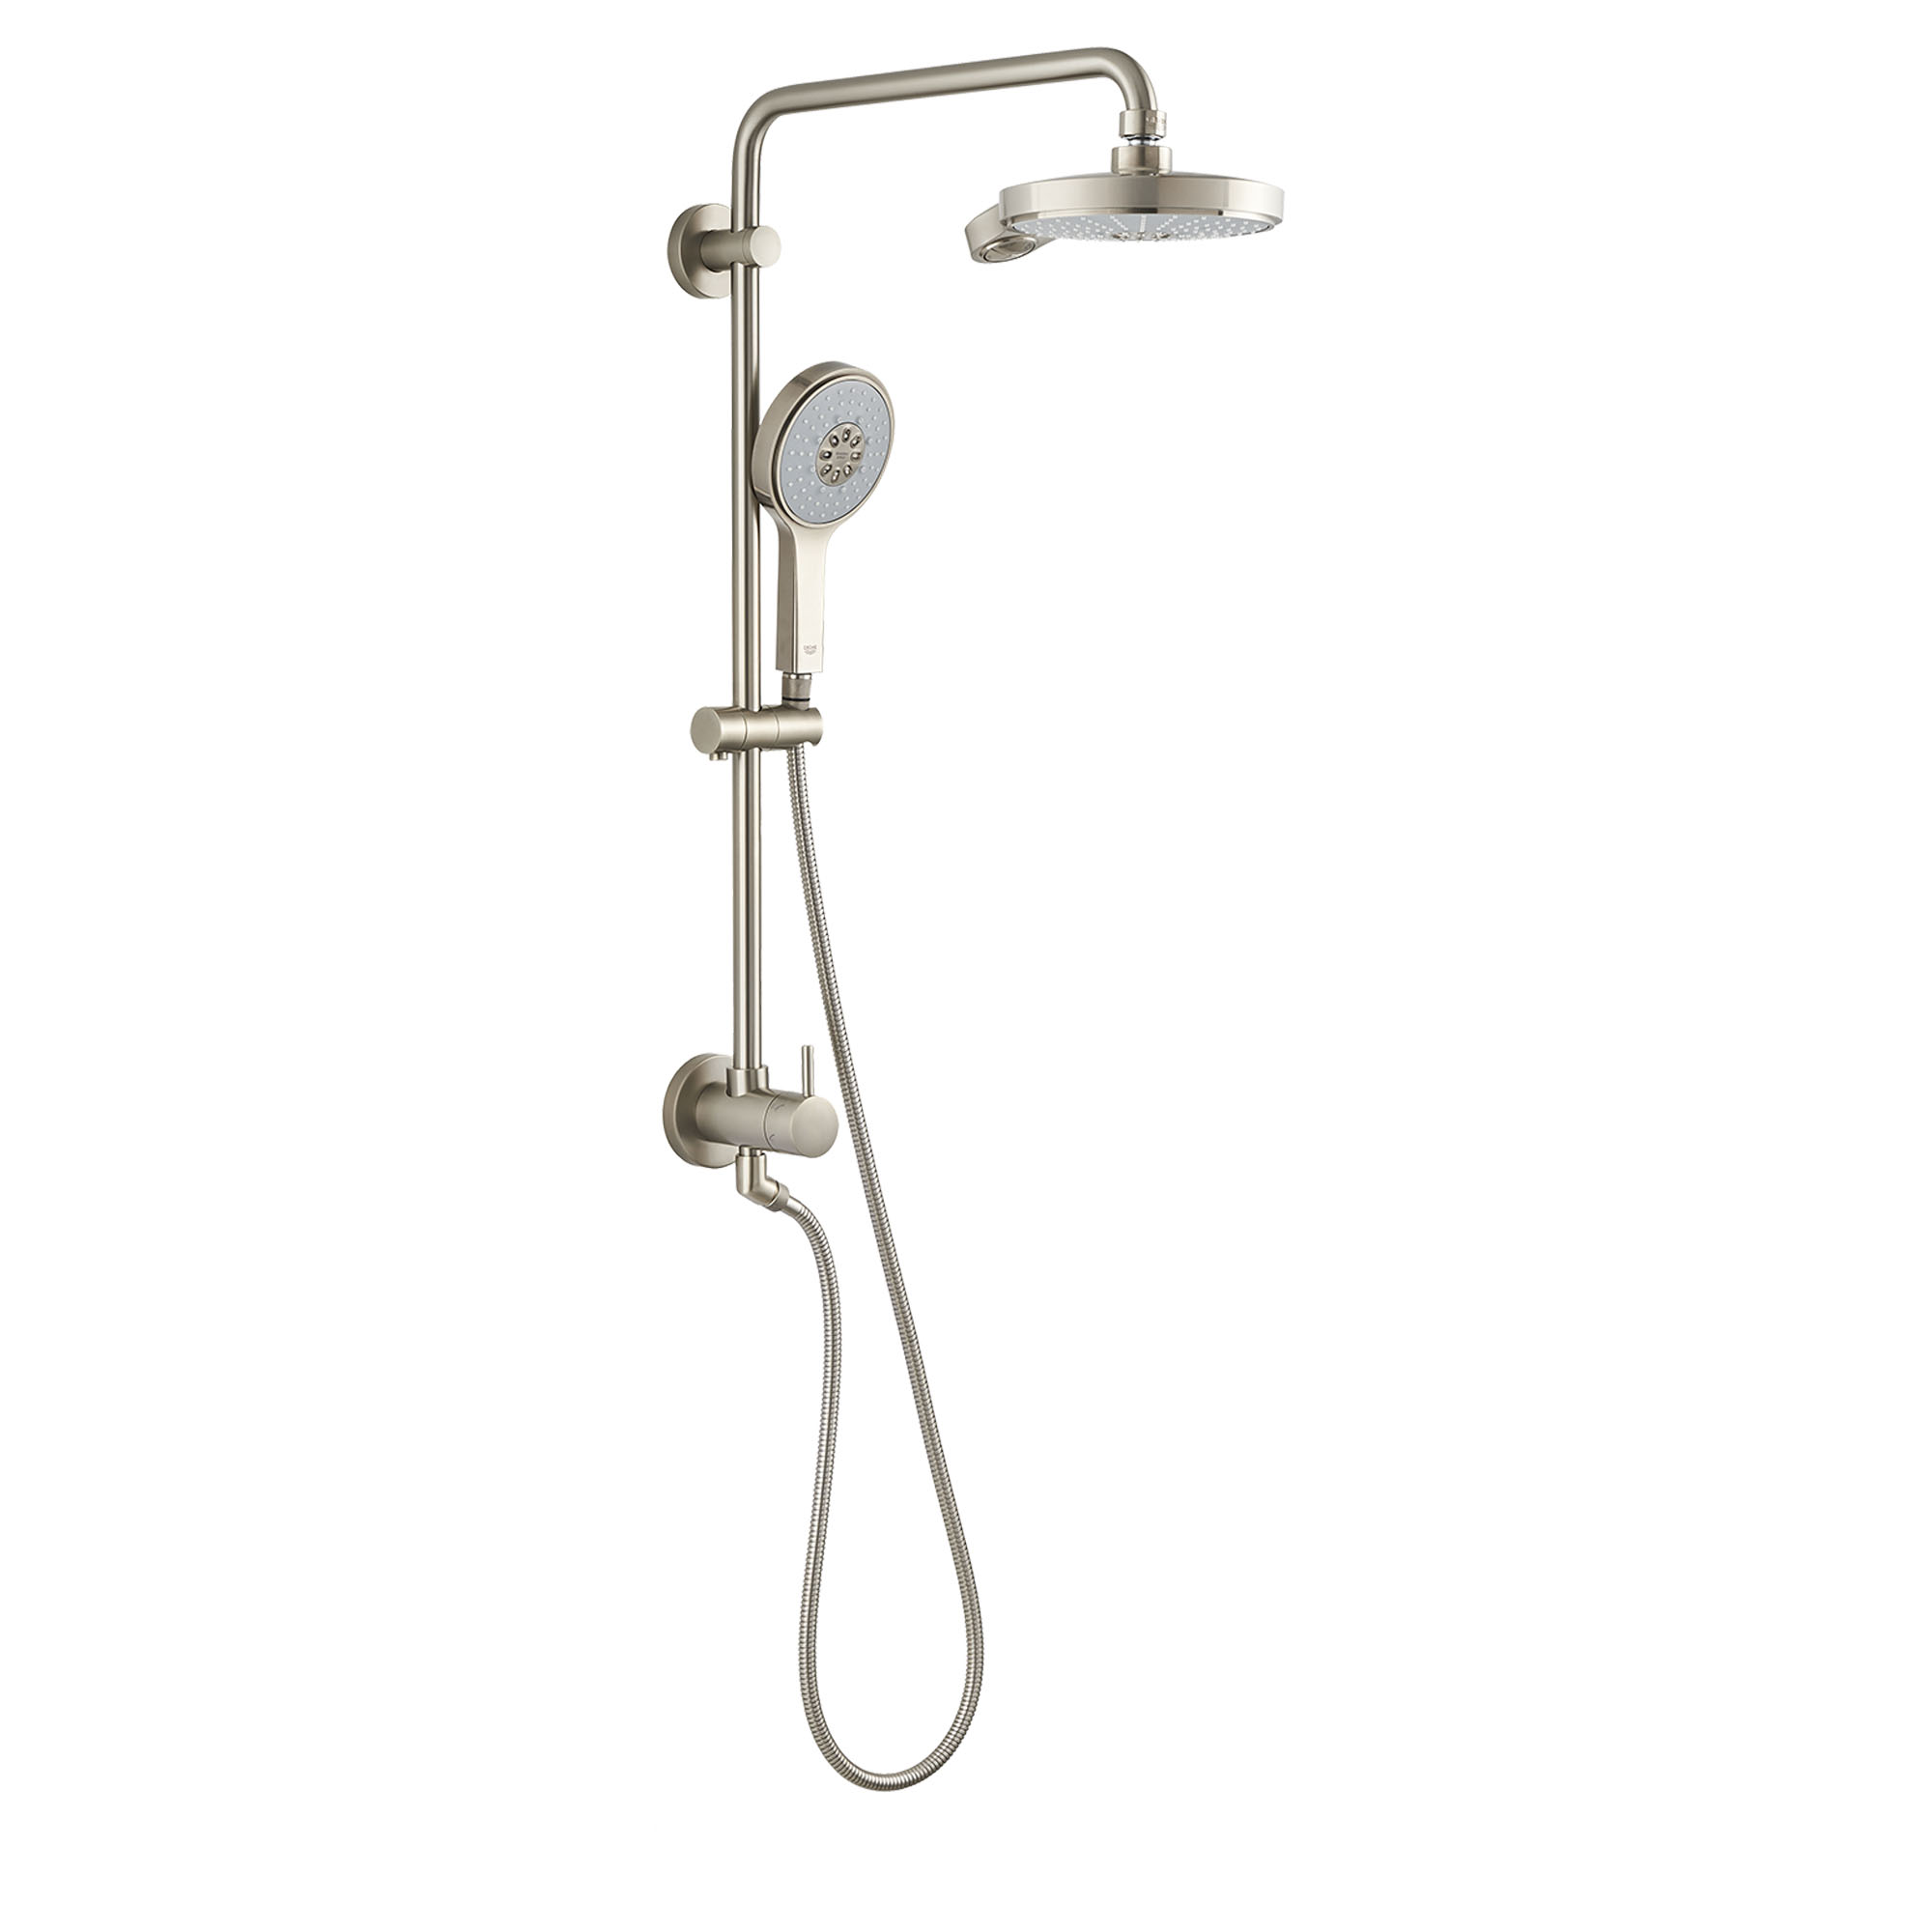 GROHE Bare Euphoria 25 in. Retrofit 1-Jet Shower System in Brushed Nickel  Infinity 26487EN0 - The Home Depot